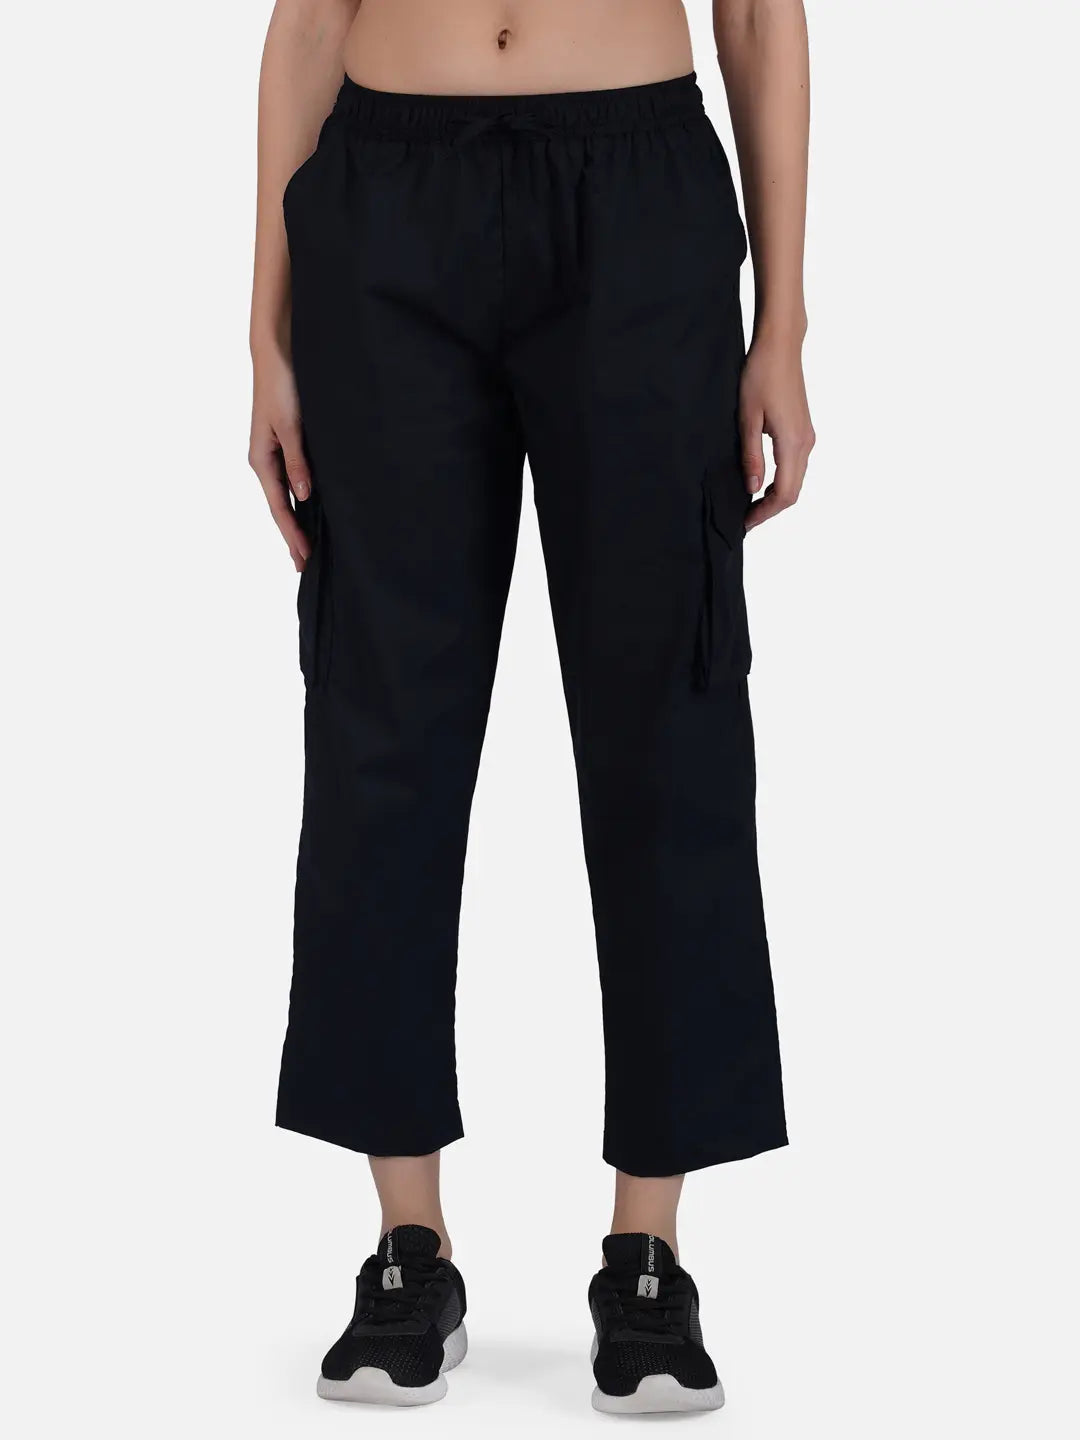 A Relaxed Fit Multi Pocket Cargo Pants  InditexFashion